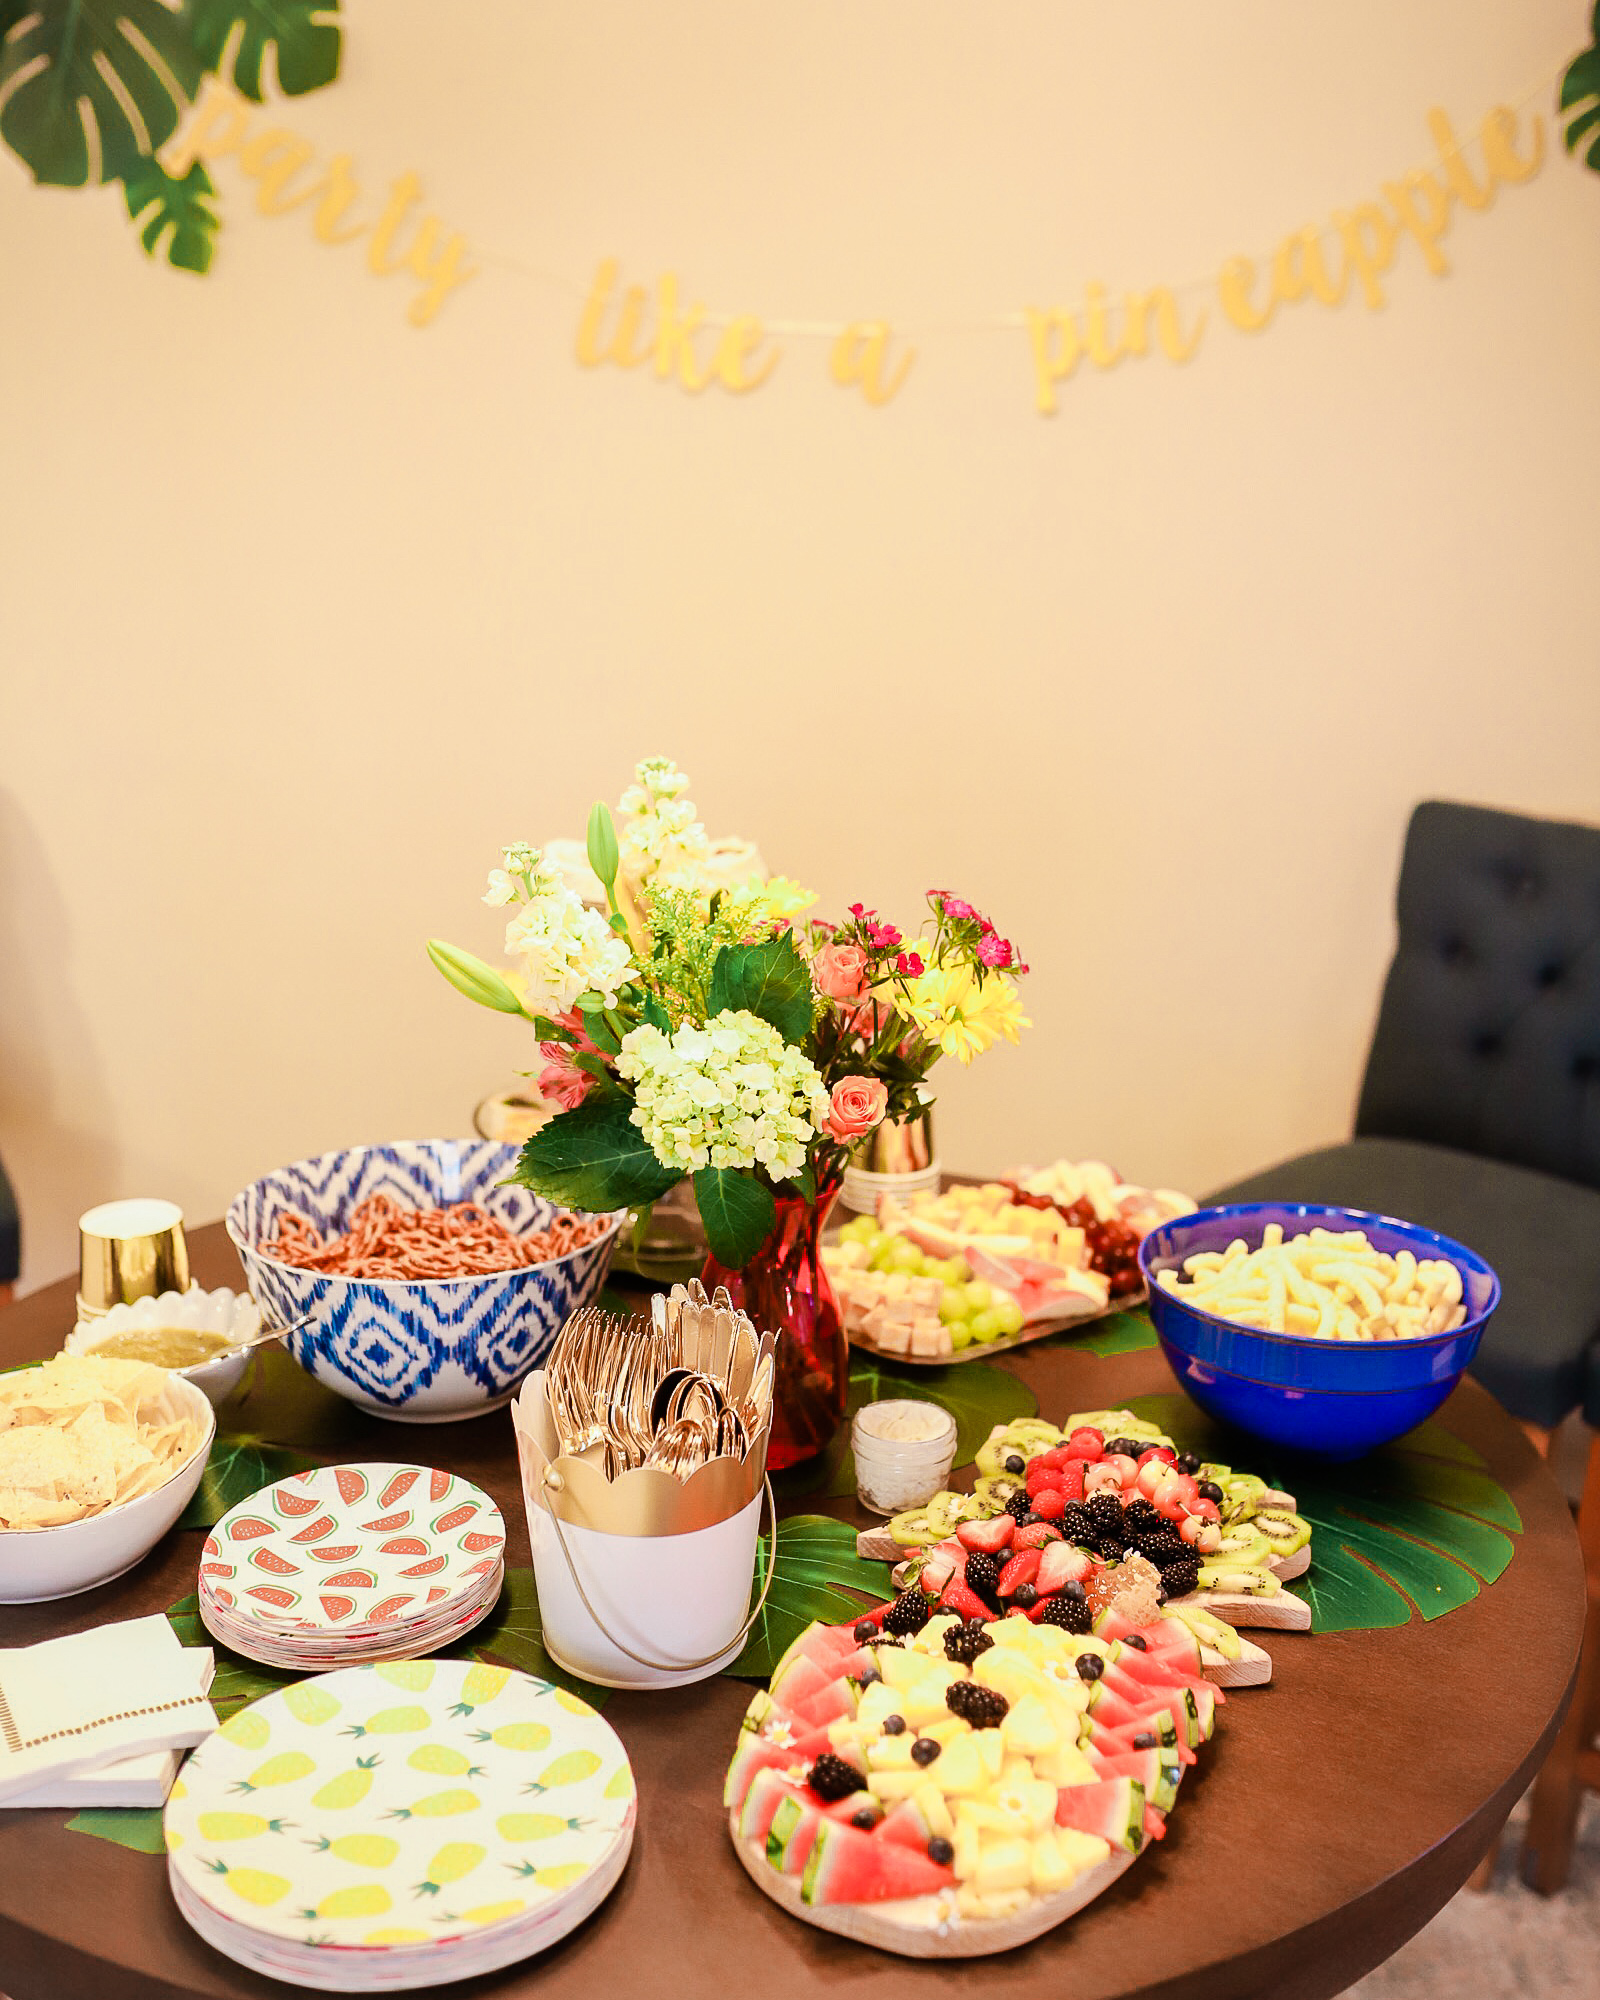 7 Tips for Stress-Free Party Planning - Thrifty Pineapple